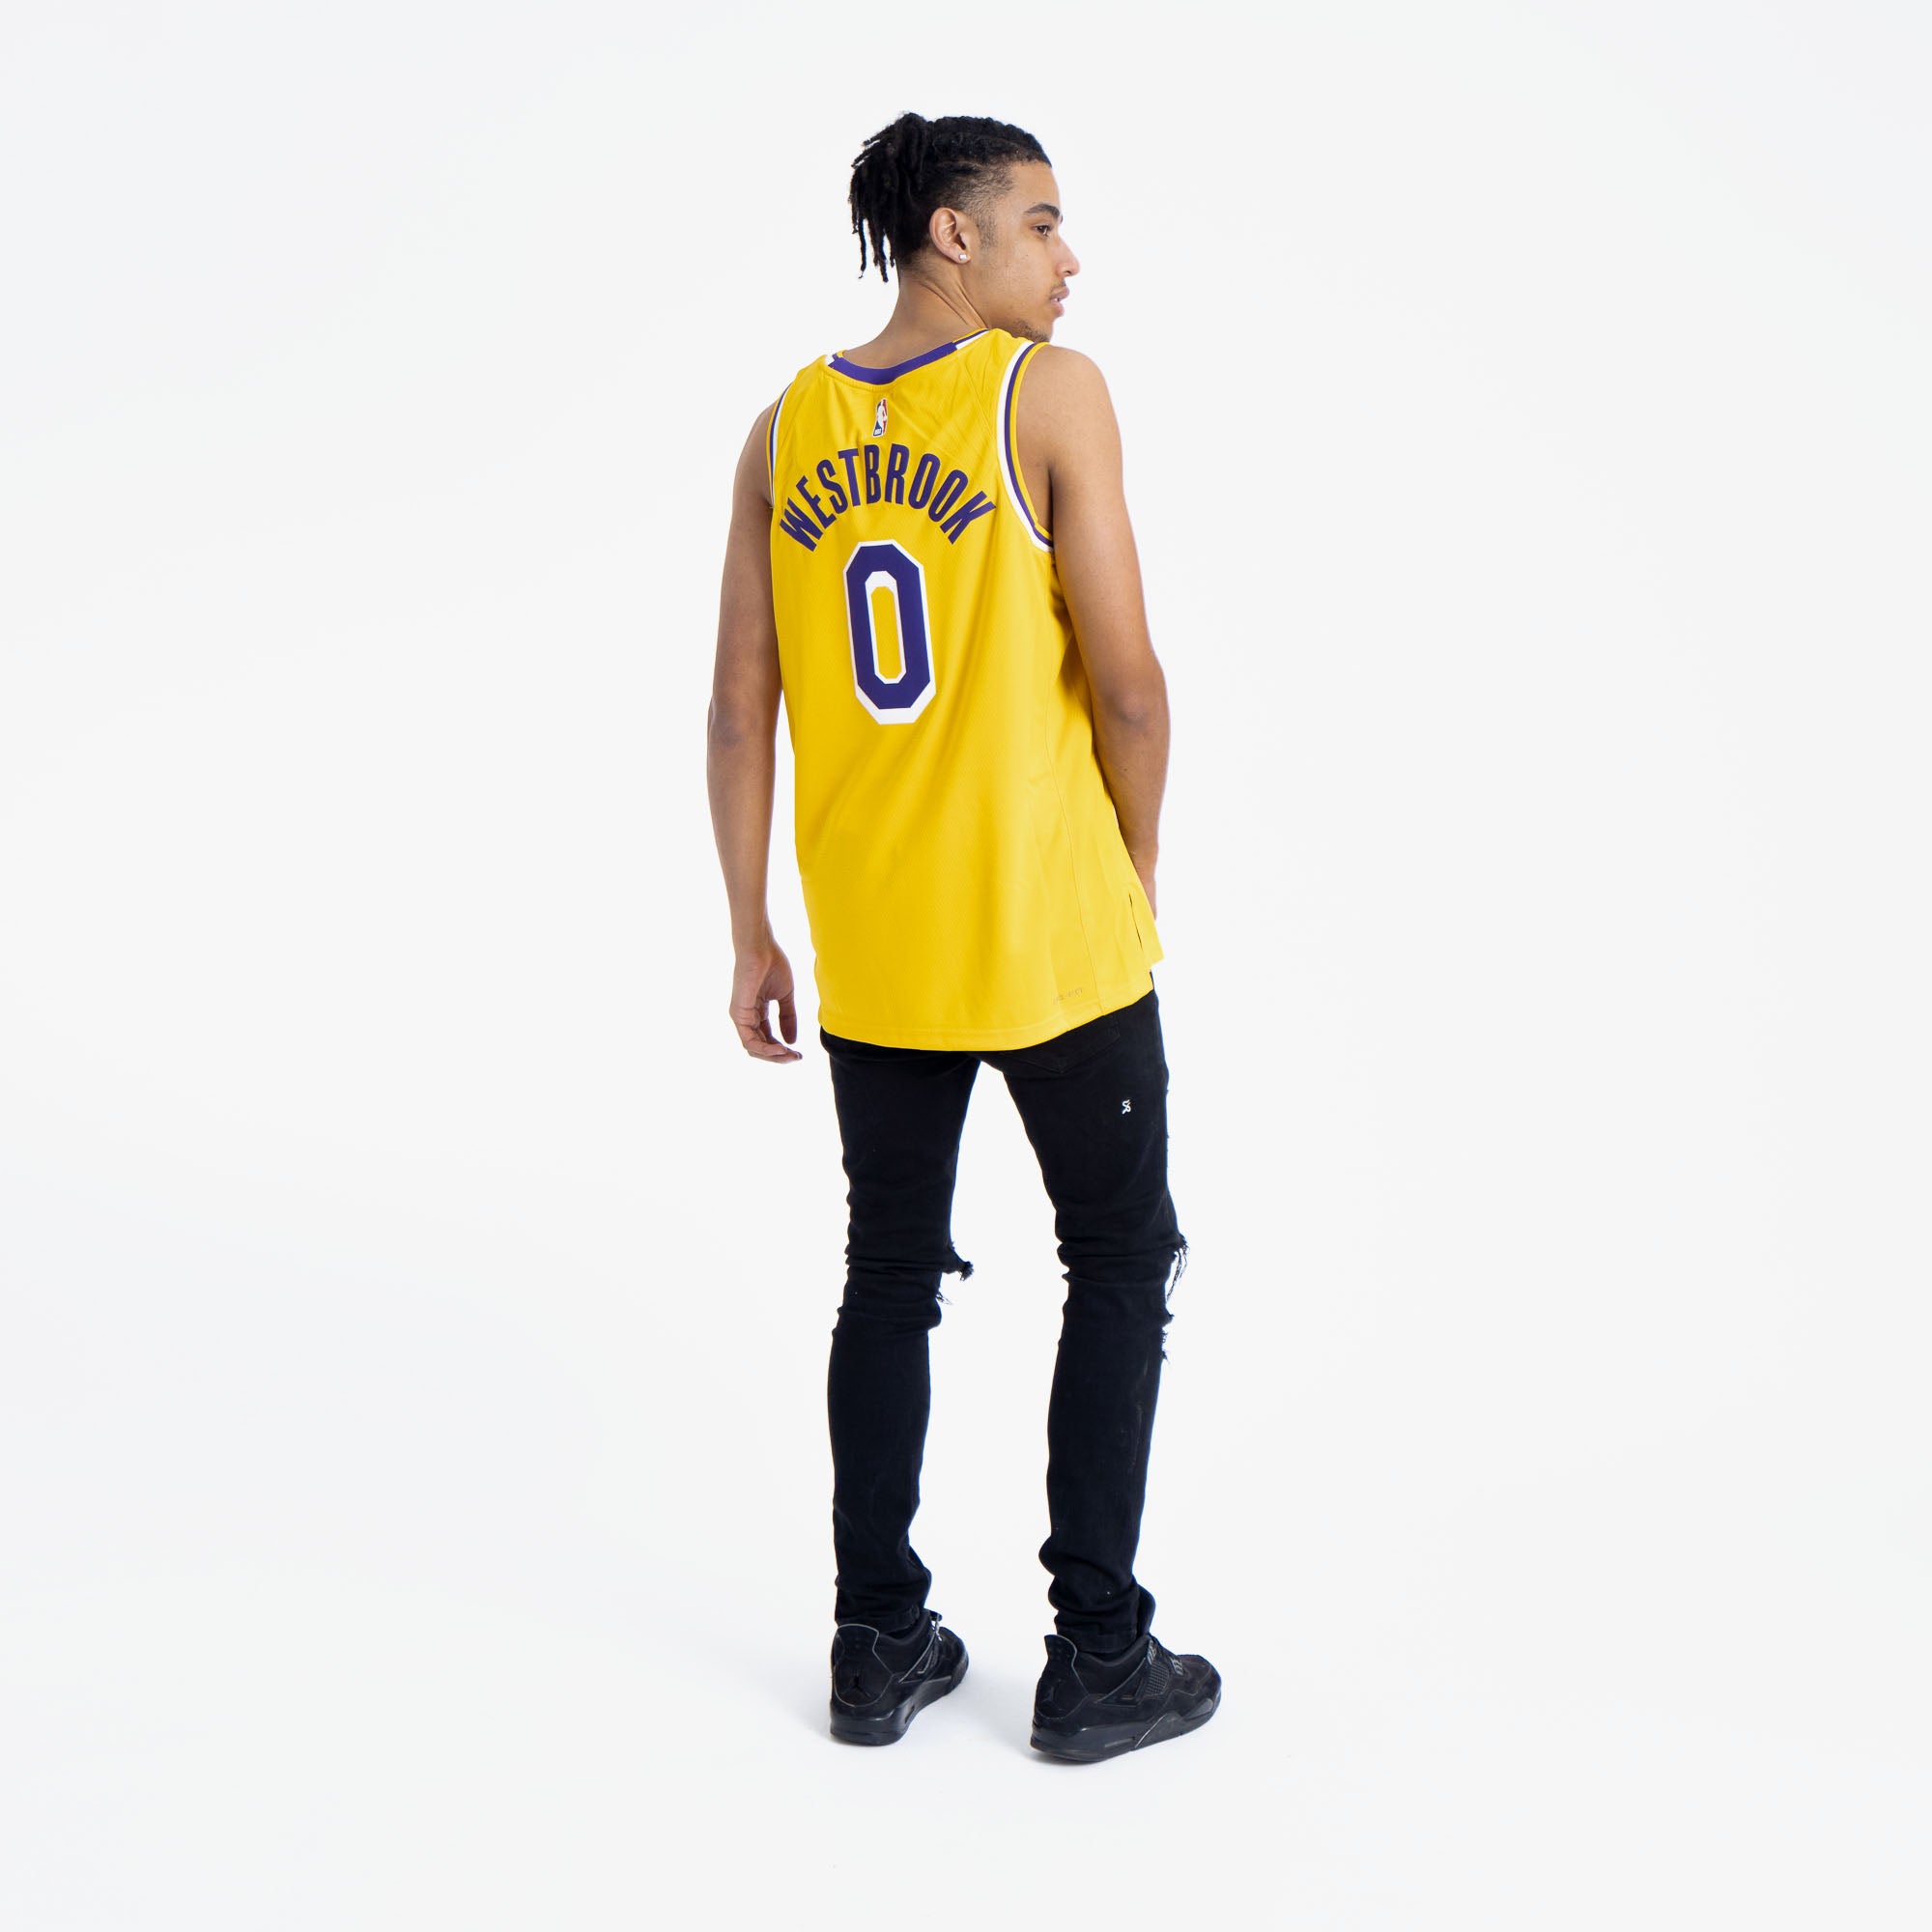 lakers city jersey westbrook